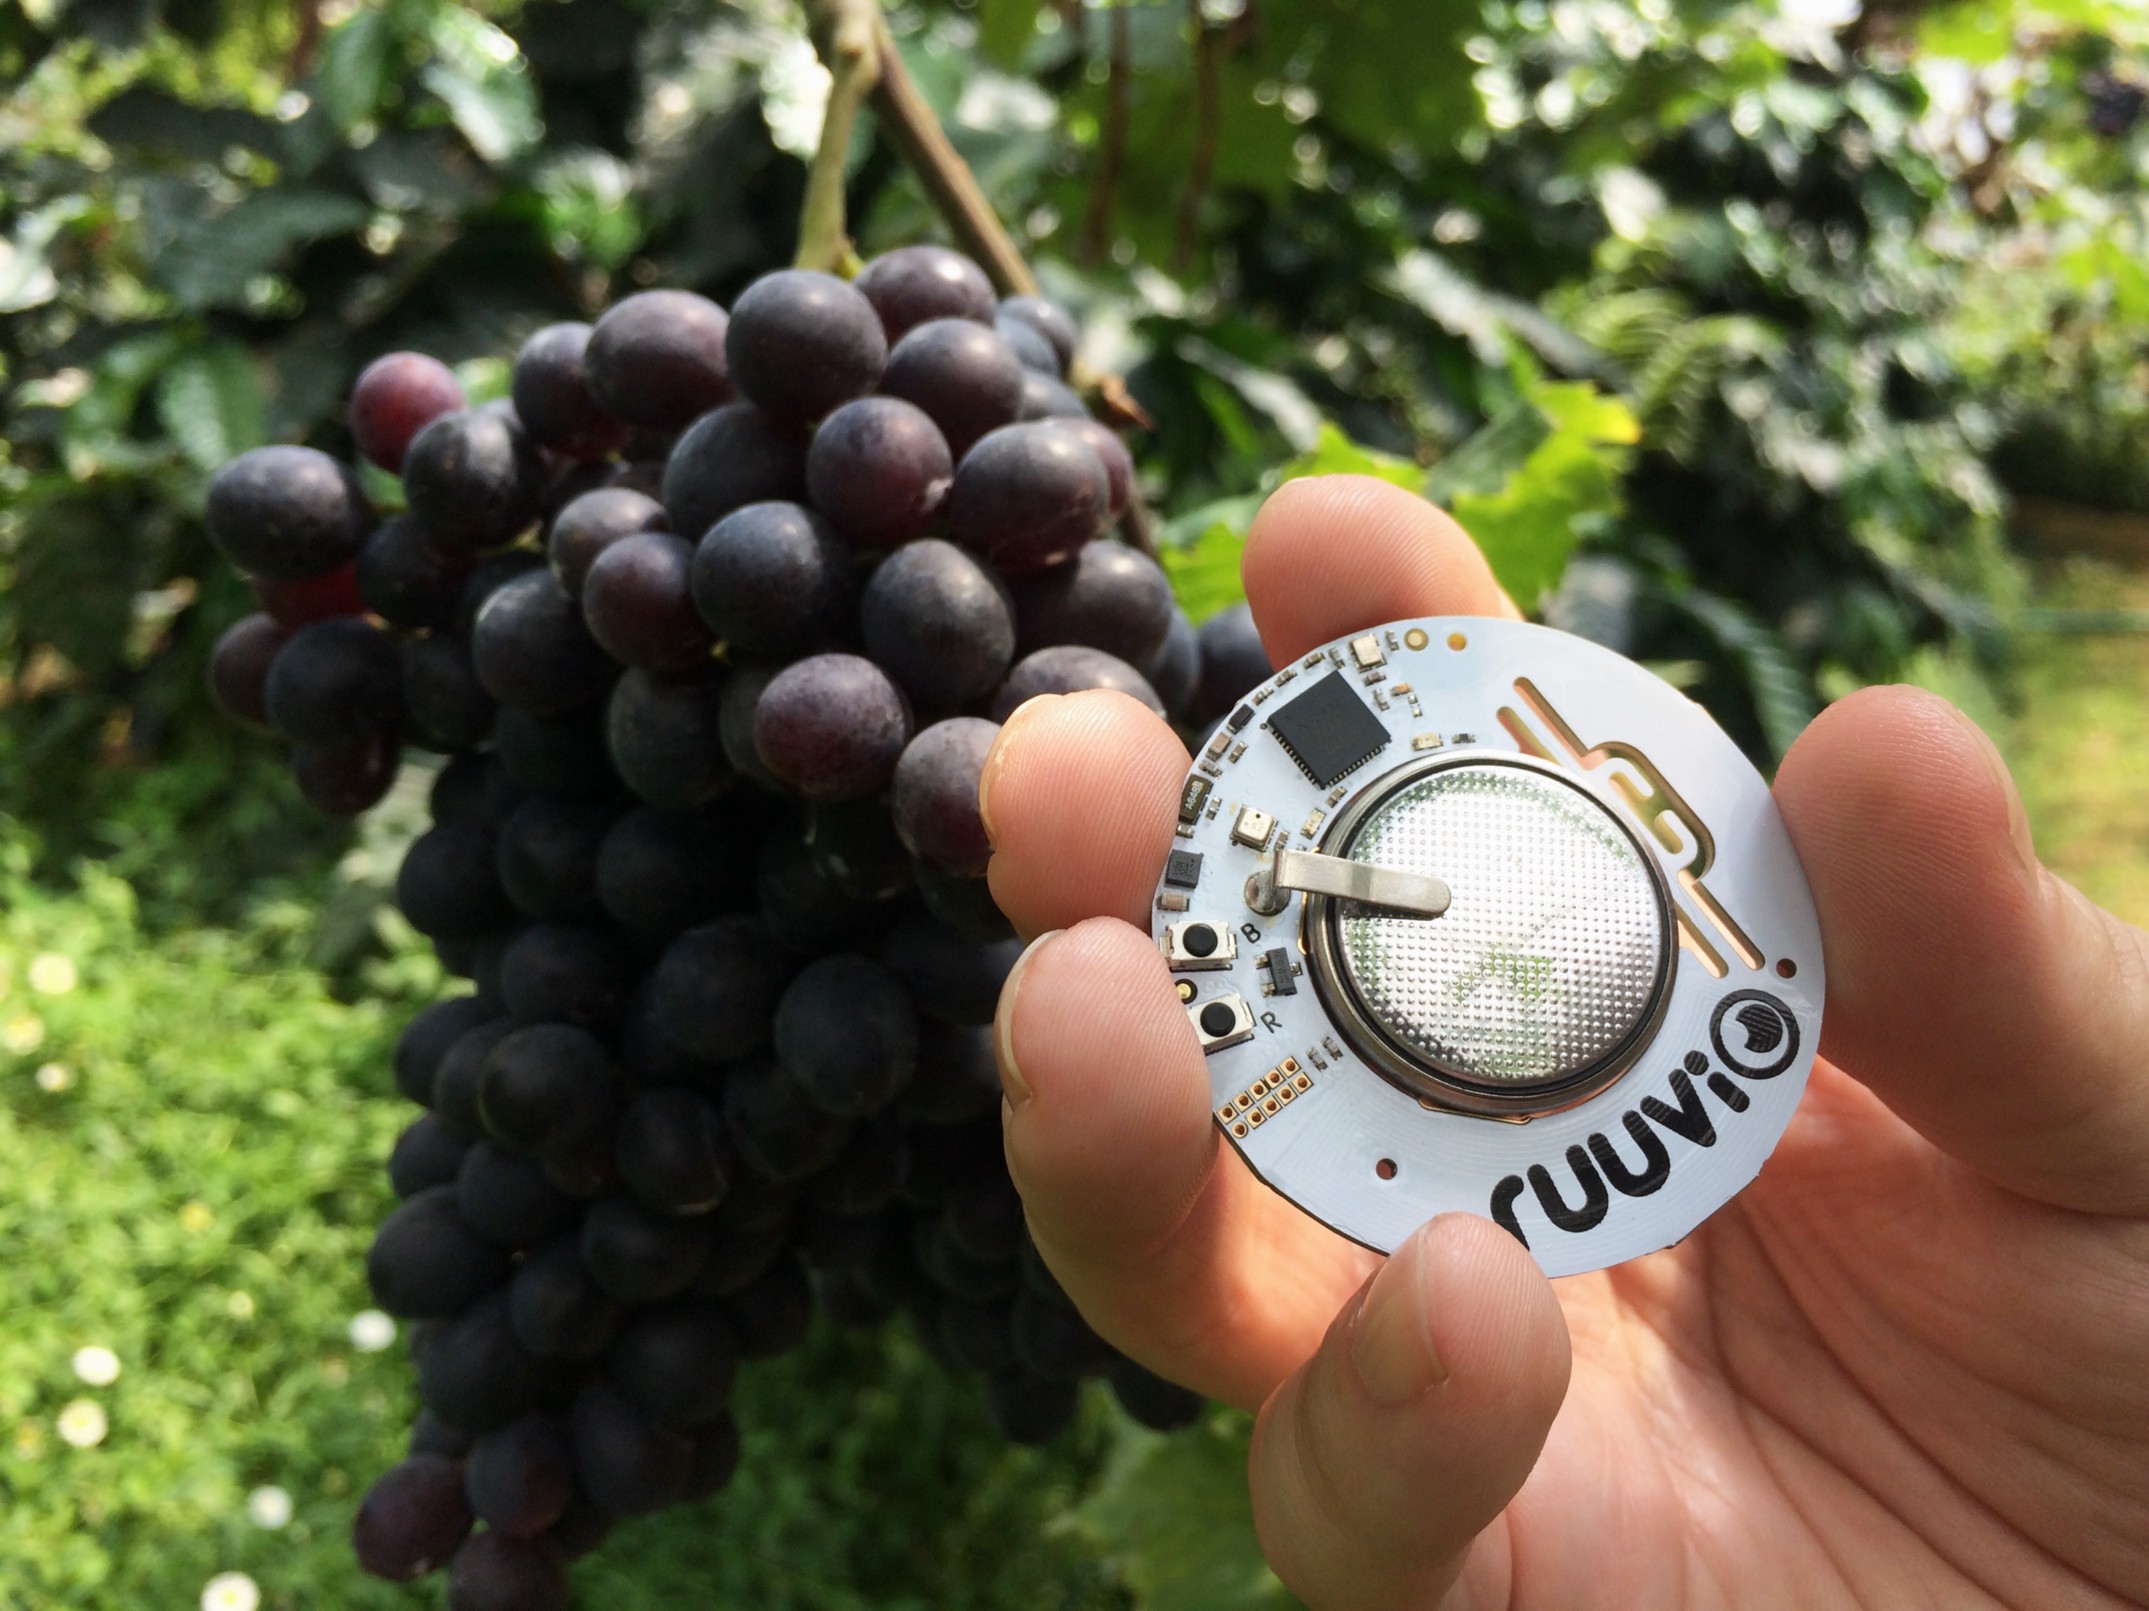 Nautic-Instruments - 10% Off on Naudet Wine Cellar Indicator OPTIMAL The  OPTIMAL is a thermometer-hygrometer, it measures the temperature and  humidity of the wine cellar in which it is installed. The alignment